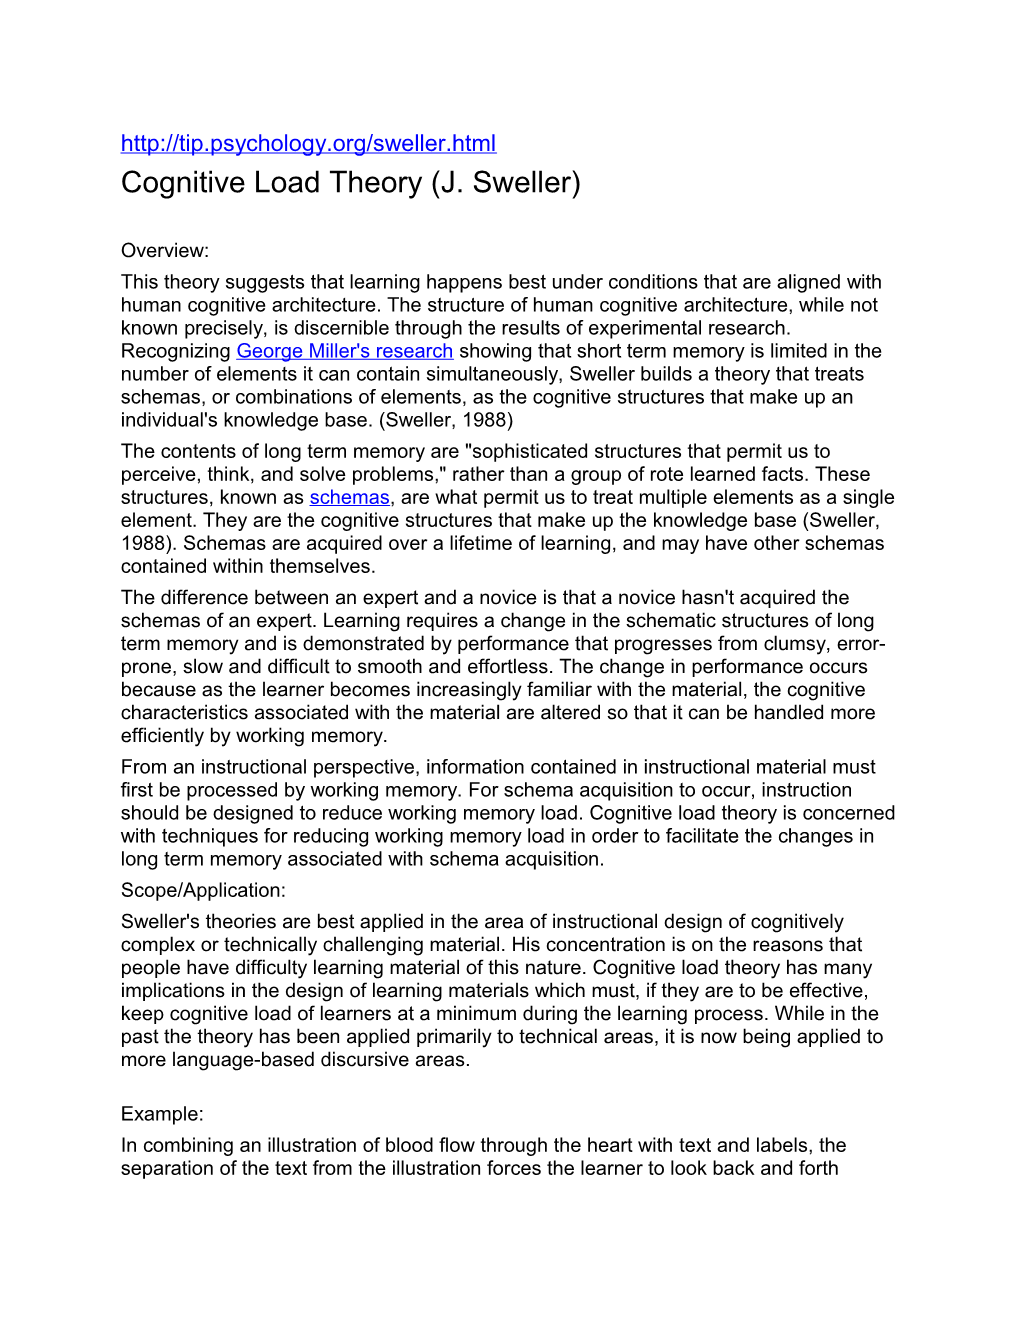 Cognitive Load Theory (J. Sweller)